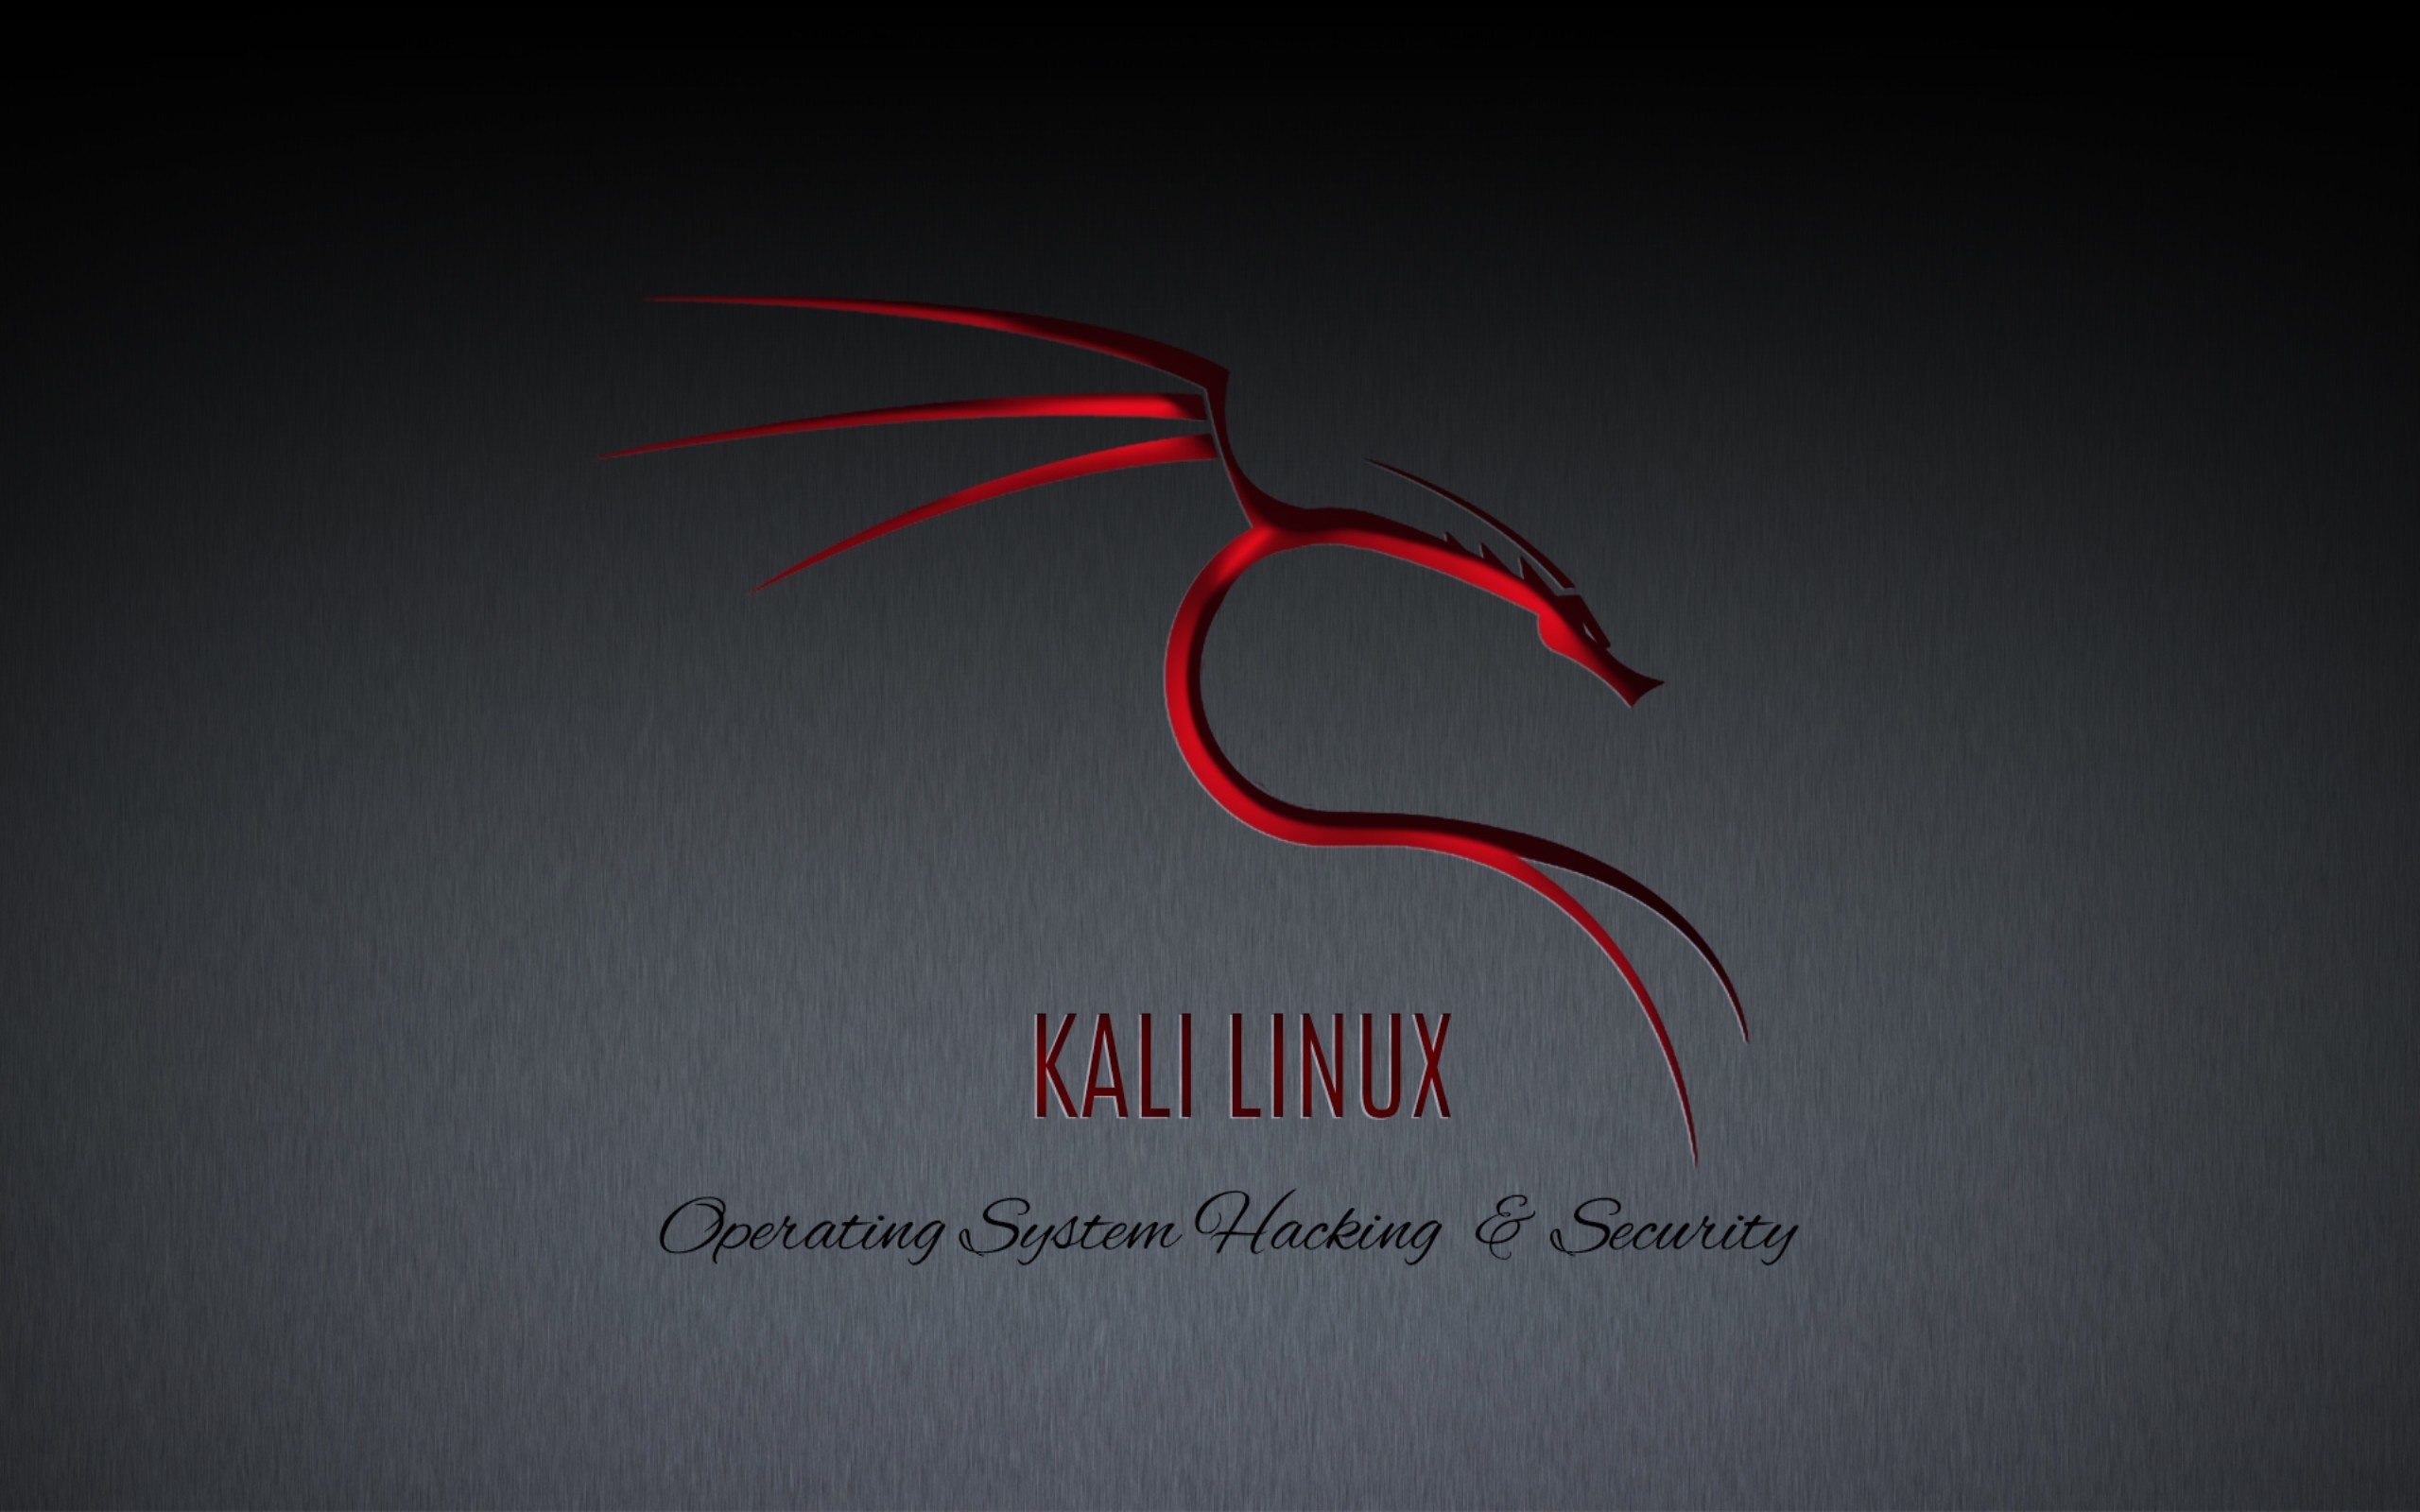 General 2560x1600 Linux simple background dragon operating system Kali Linux